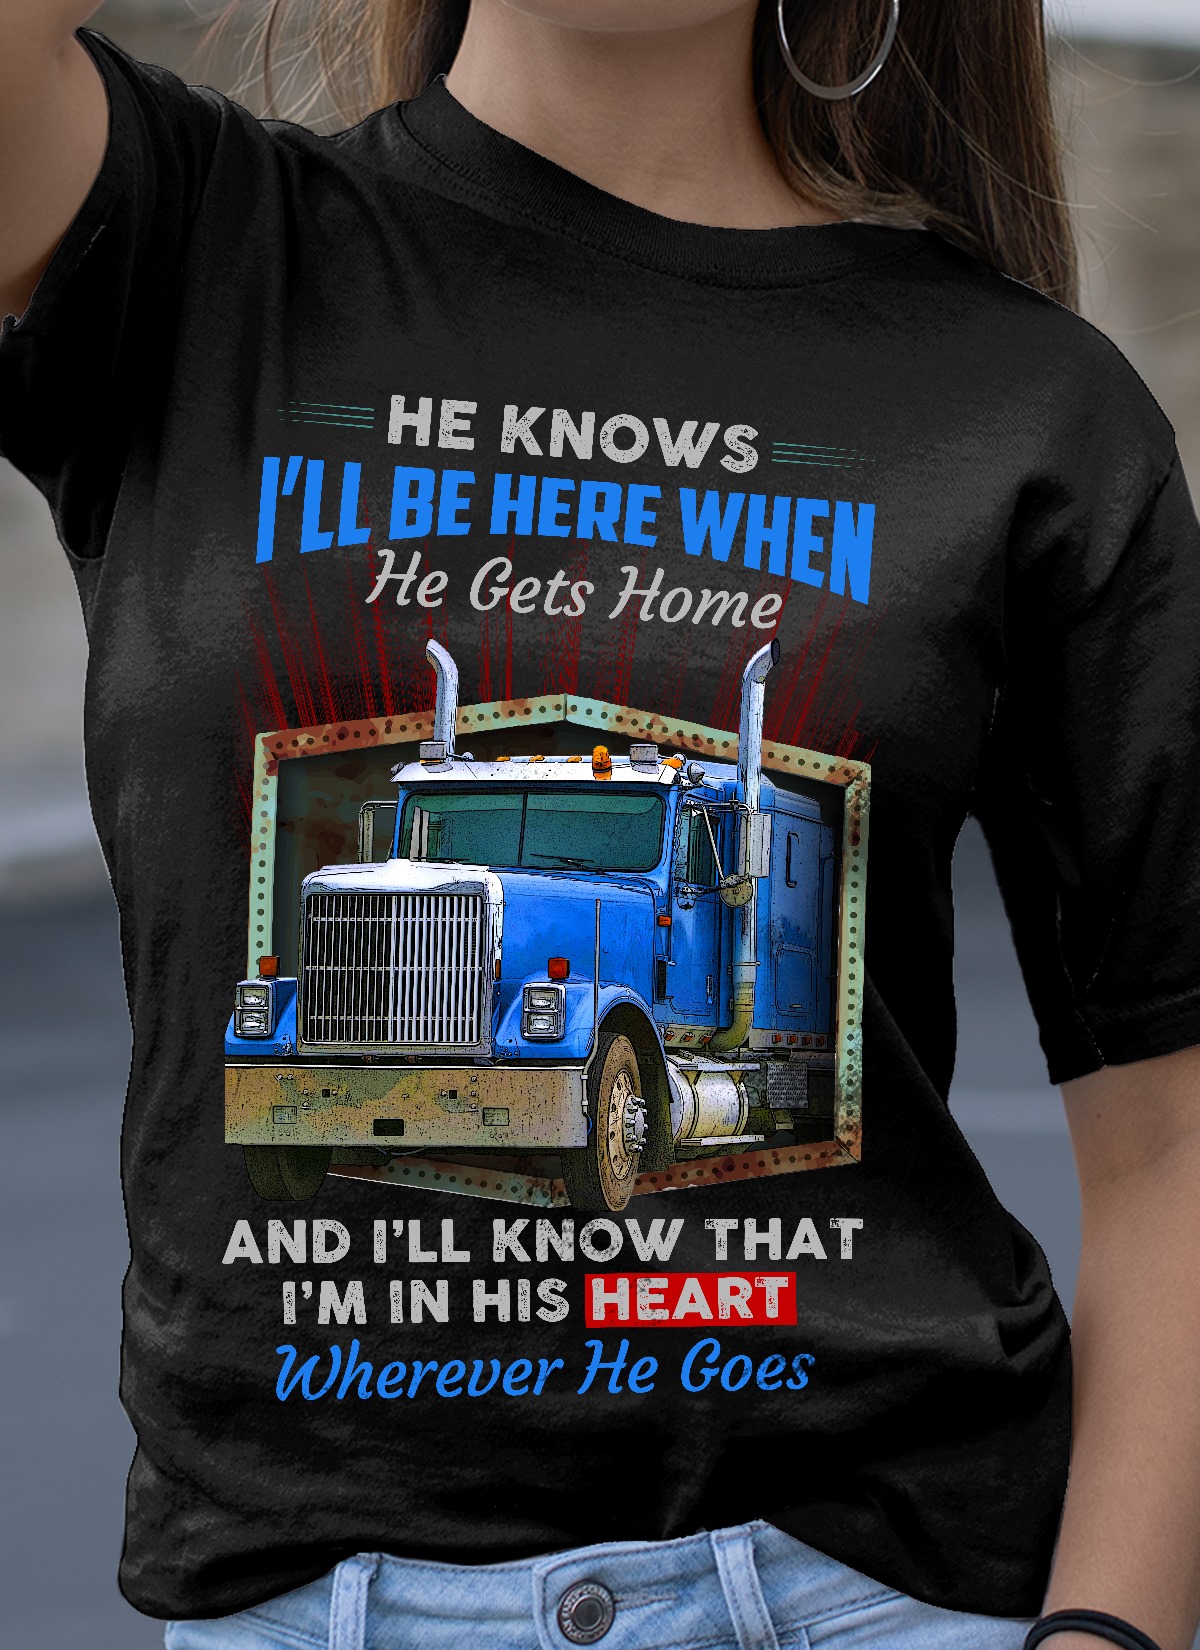 The blue truck and the quotes " He knows i'll be here when he gets home